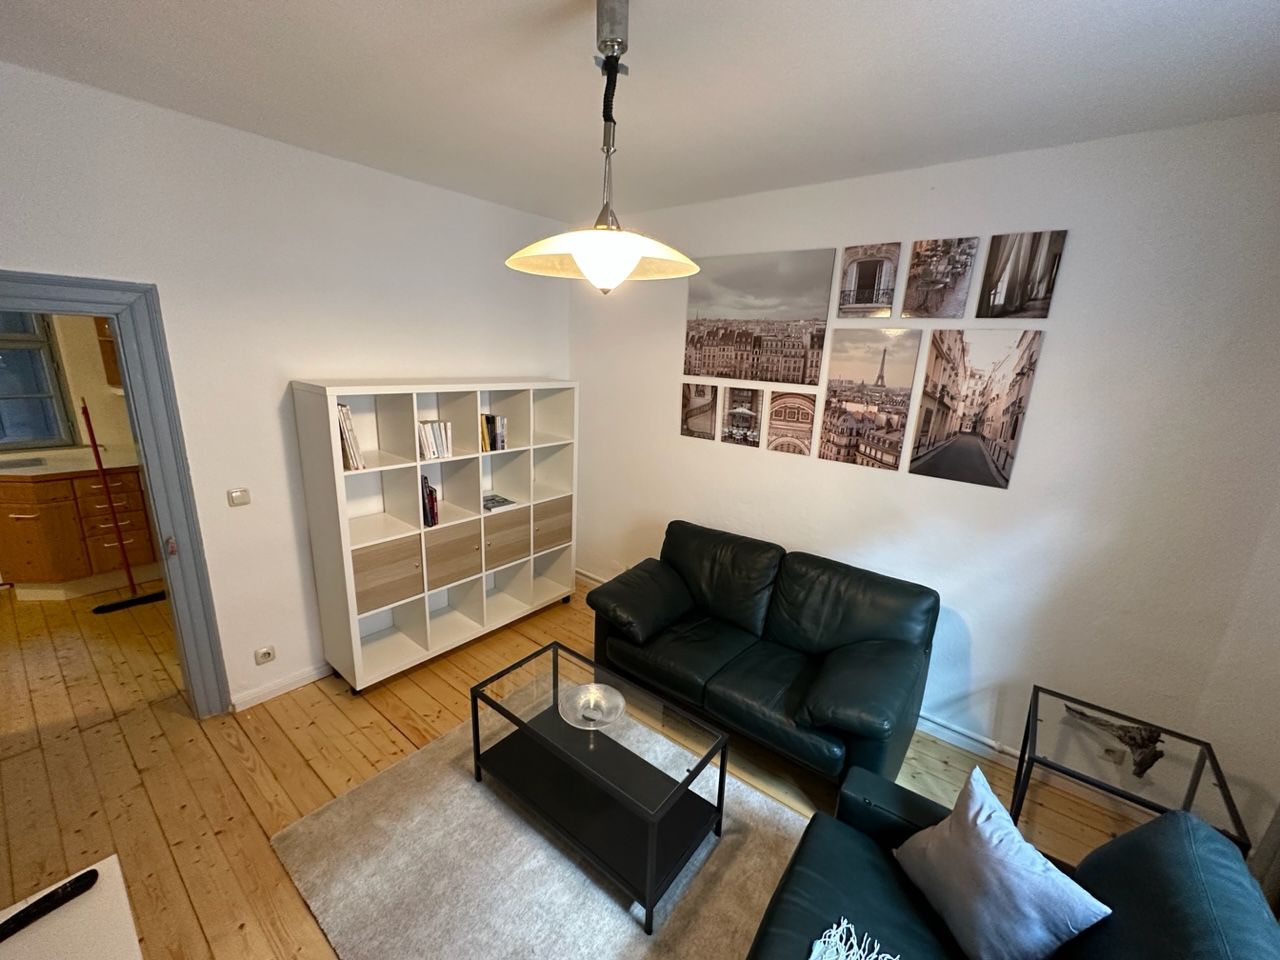 Bright, newly furnished apartment in the heart of Erlangen